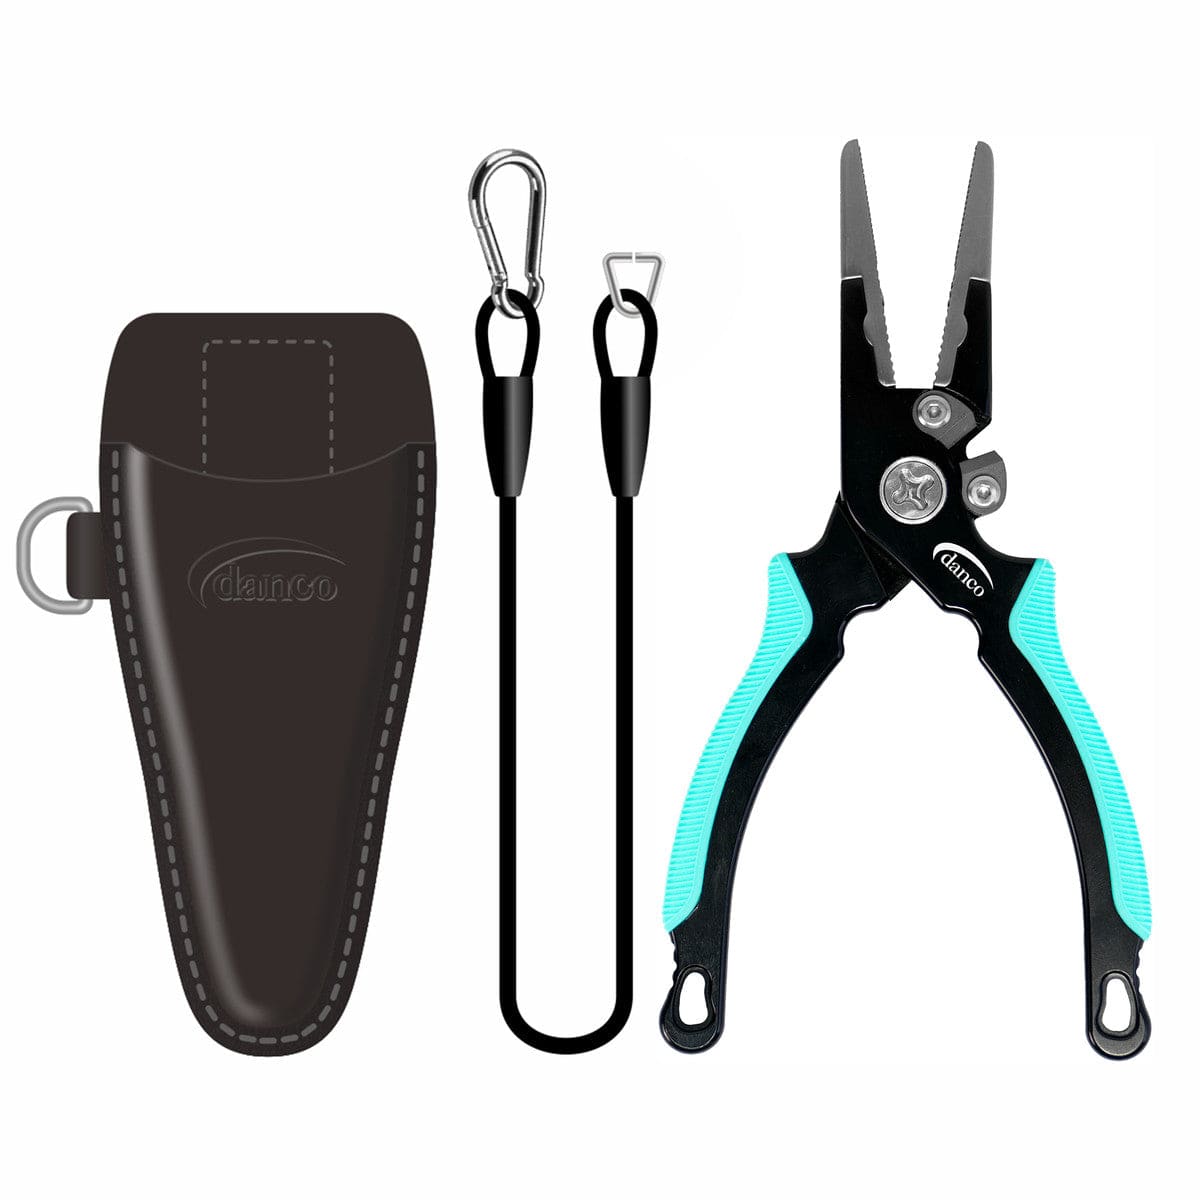 New Fishing Gear Tagged Fishing Tools_Fishing Pliers - The Saltwater Edge